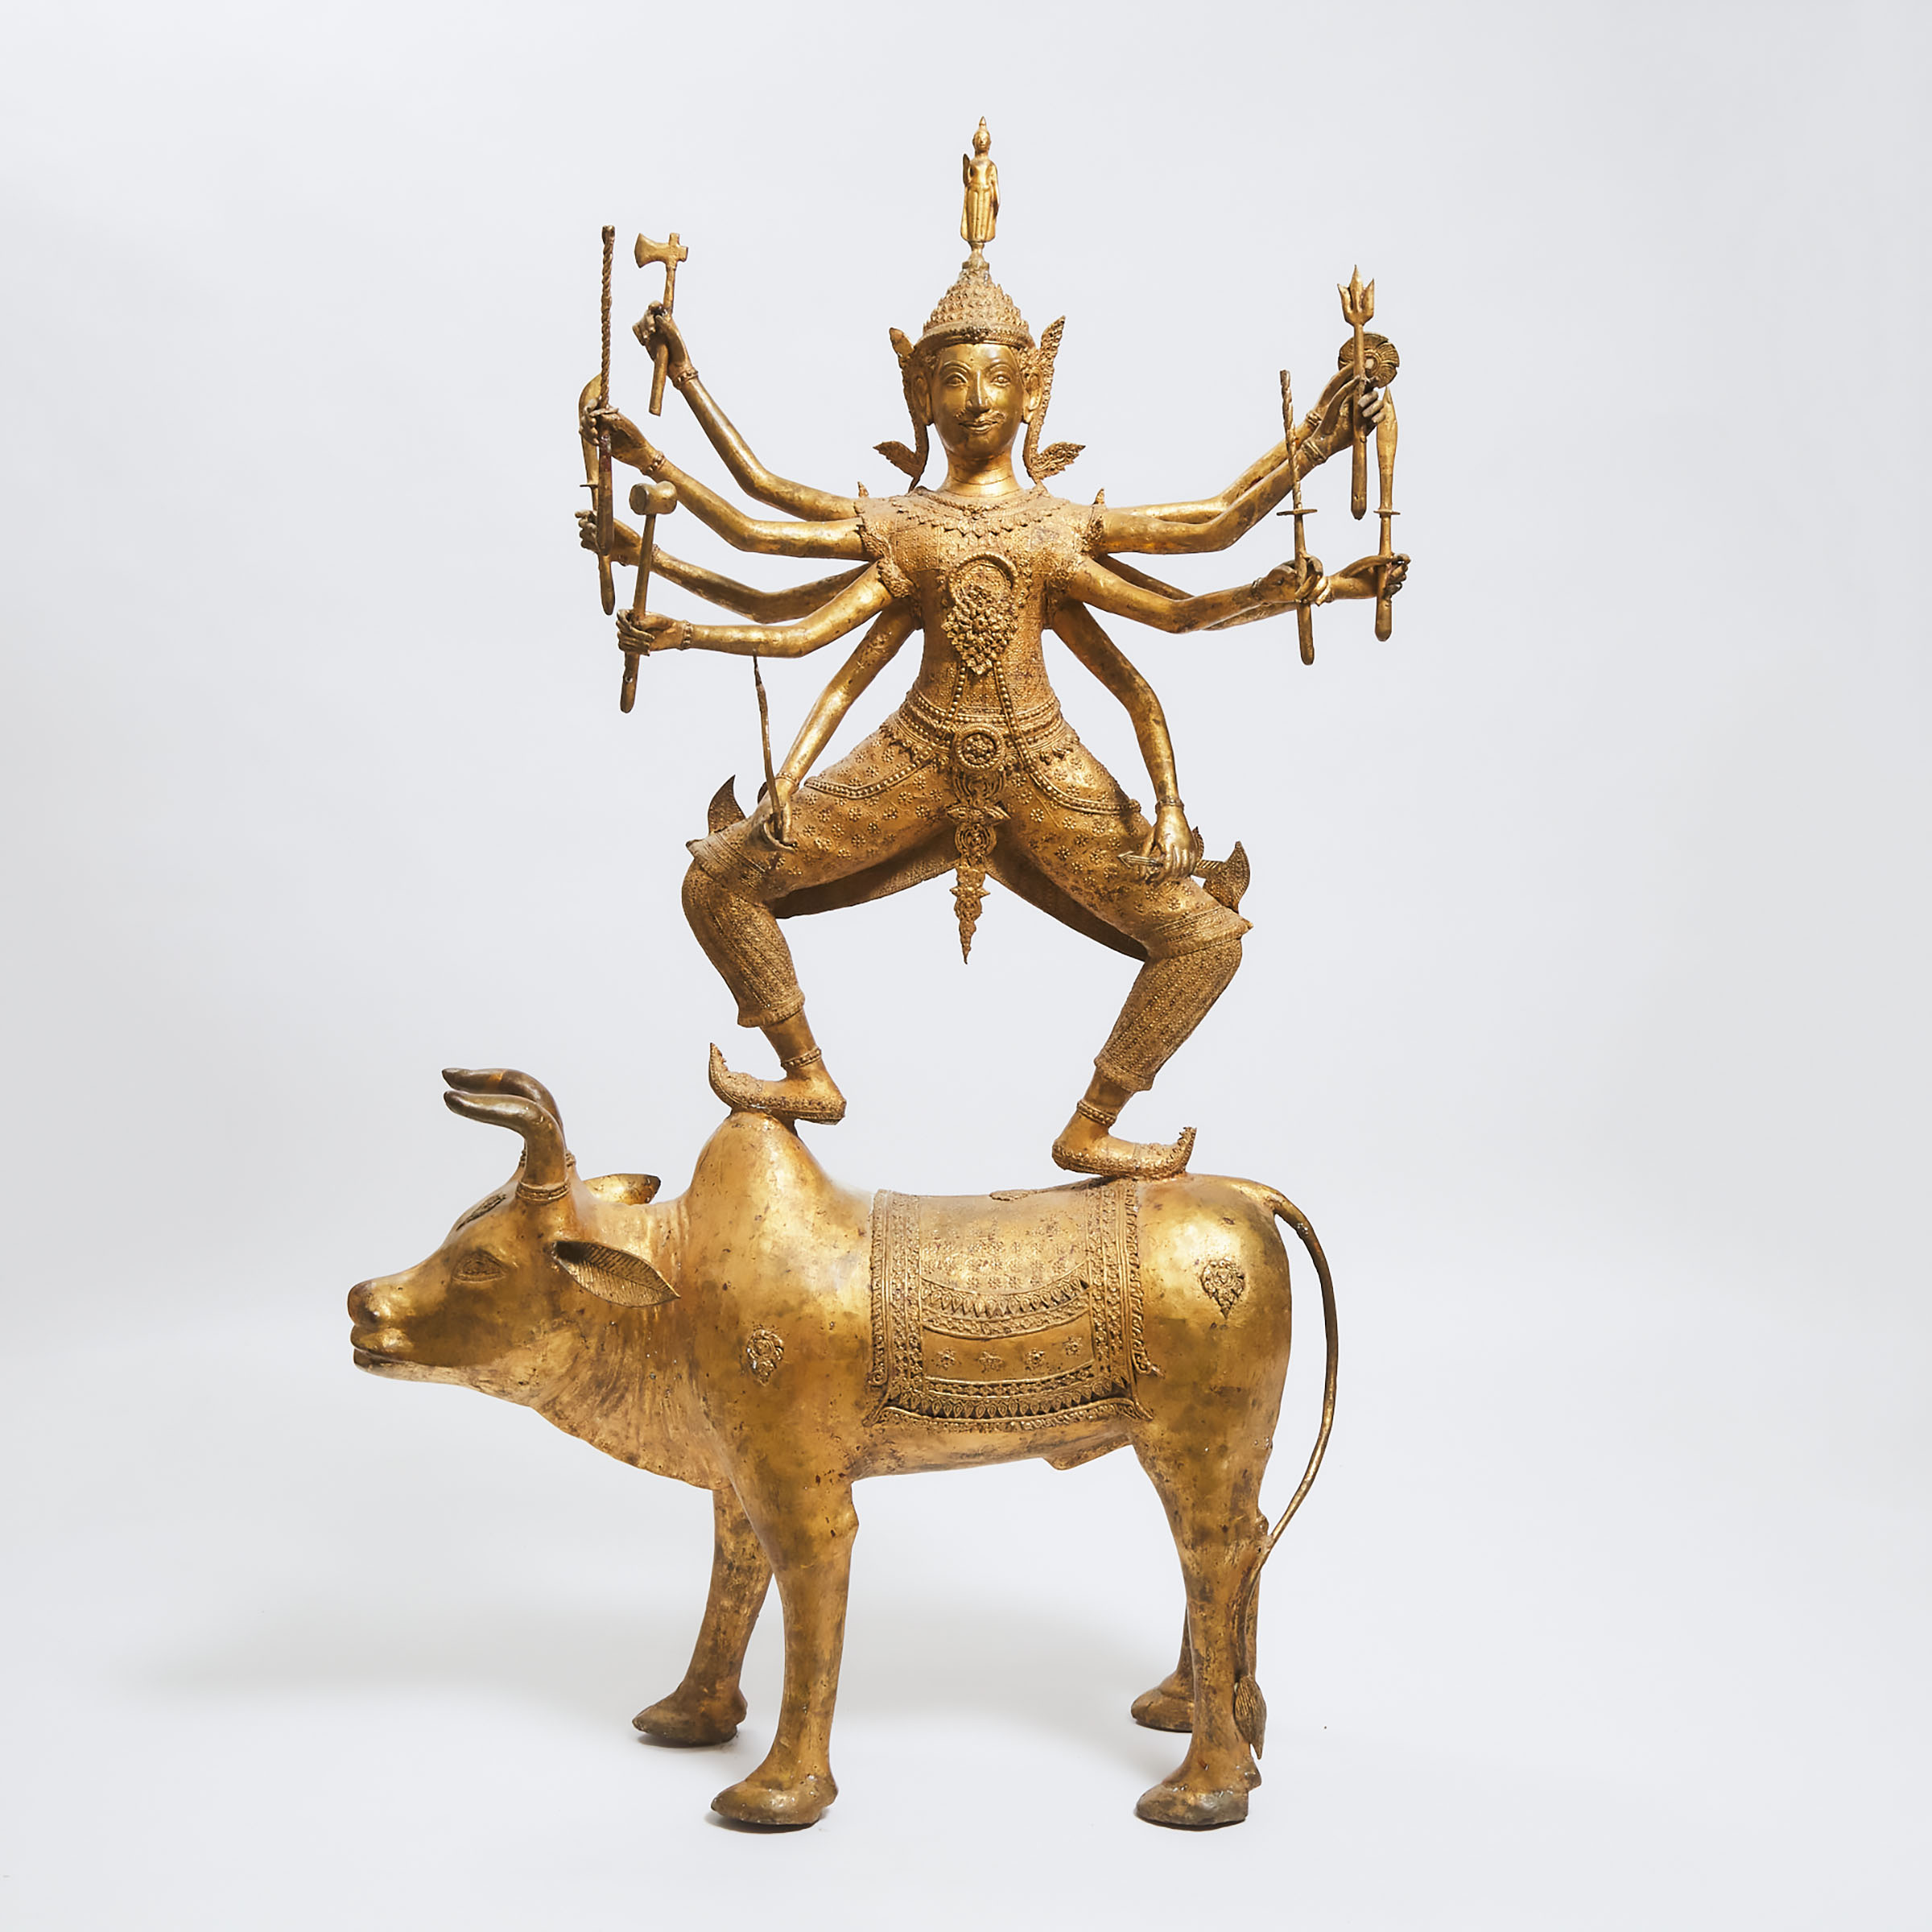 A Massive Gold-Painted Bronze Statue